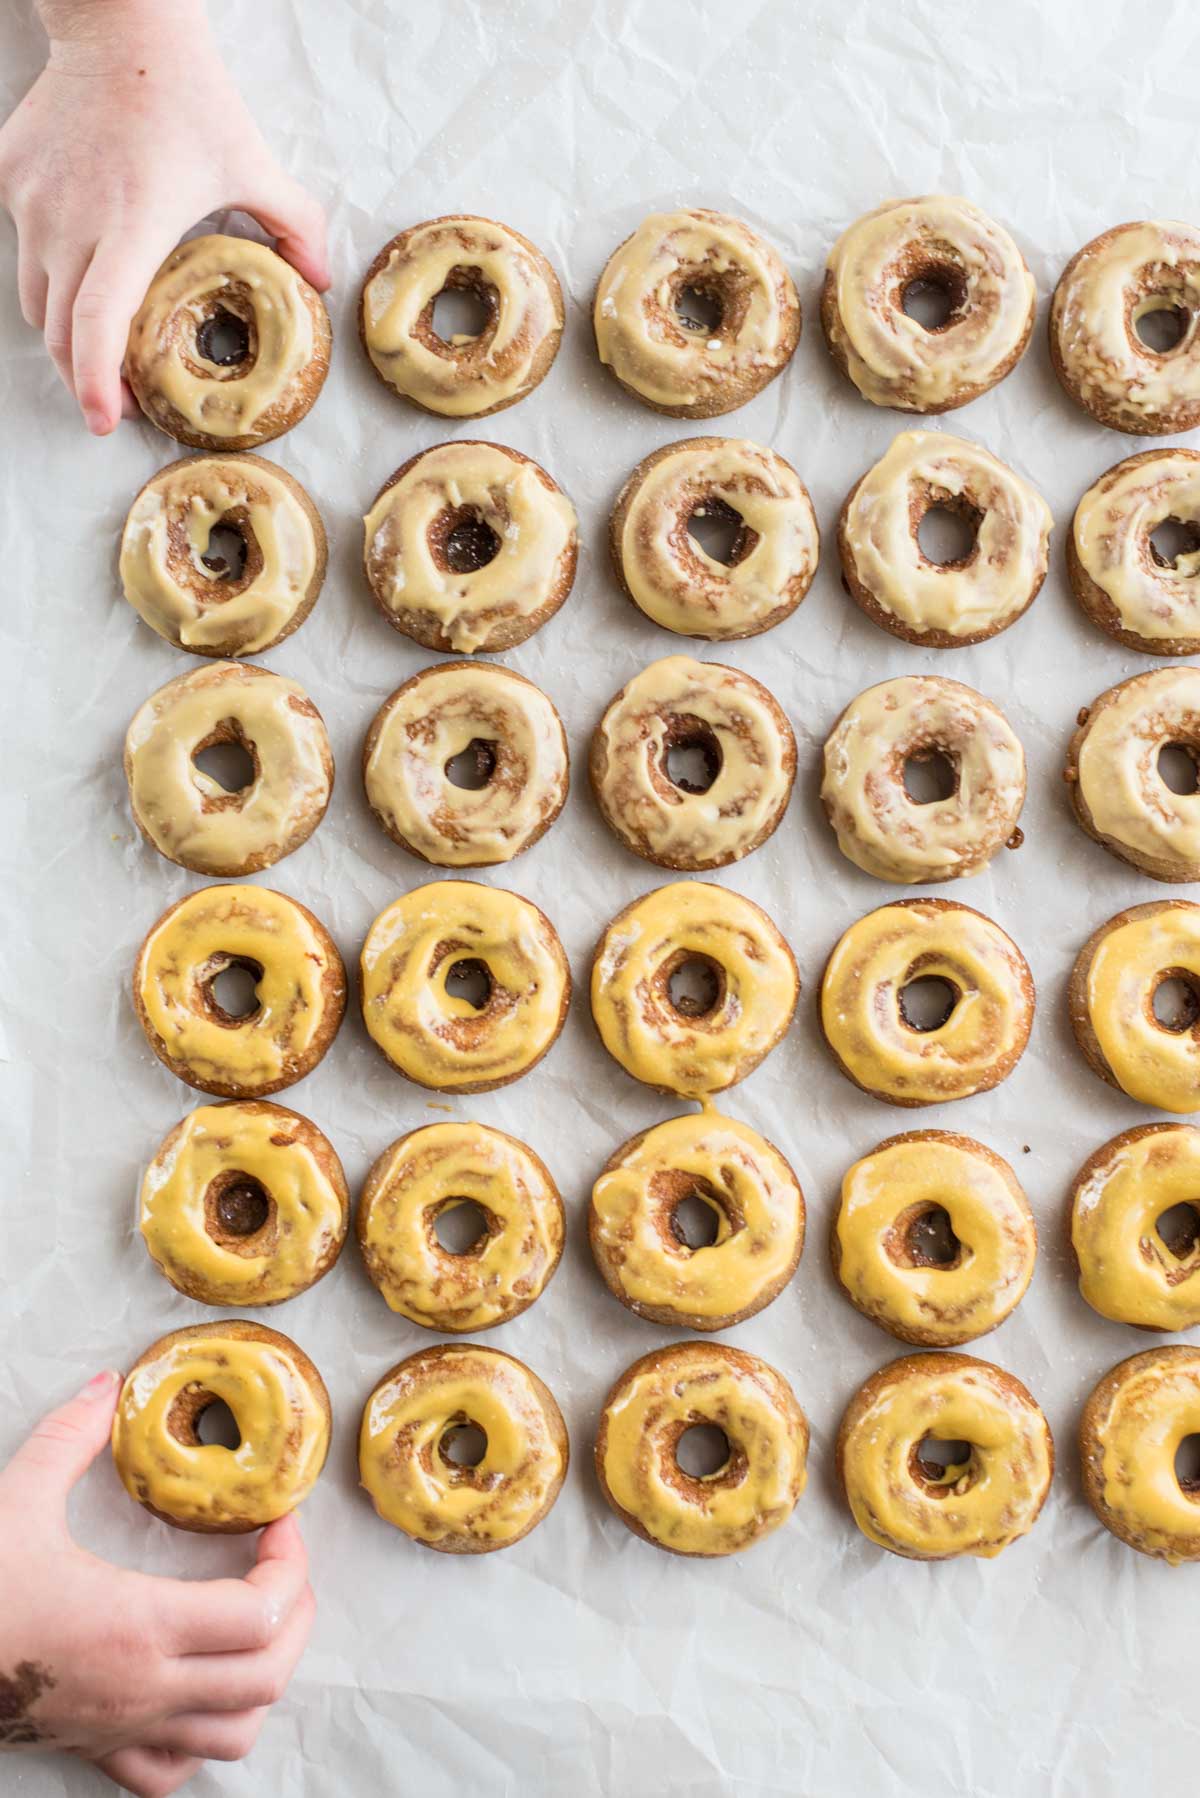 The perfect fall begins with these 10 minute apple cider donuts with maple glaze {vegan, gluten-free, paleo}